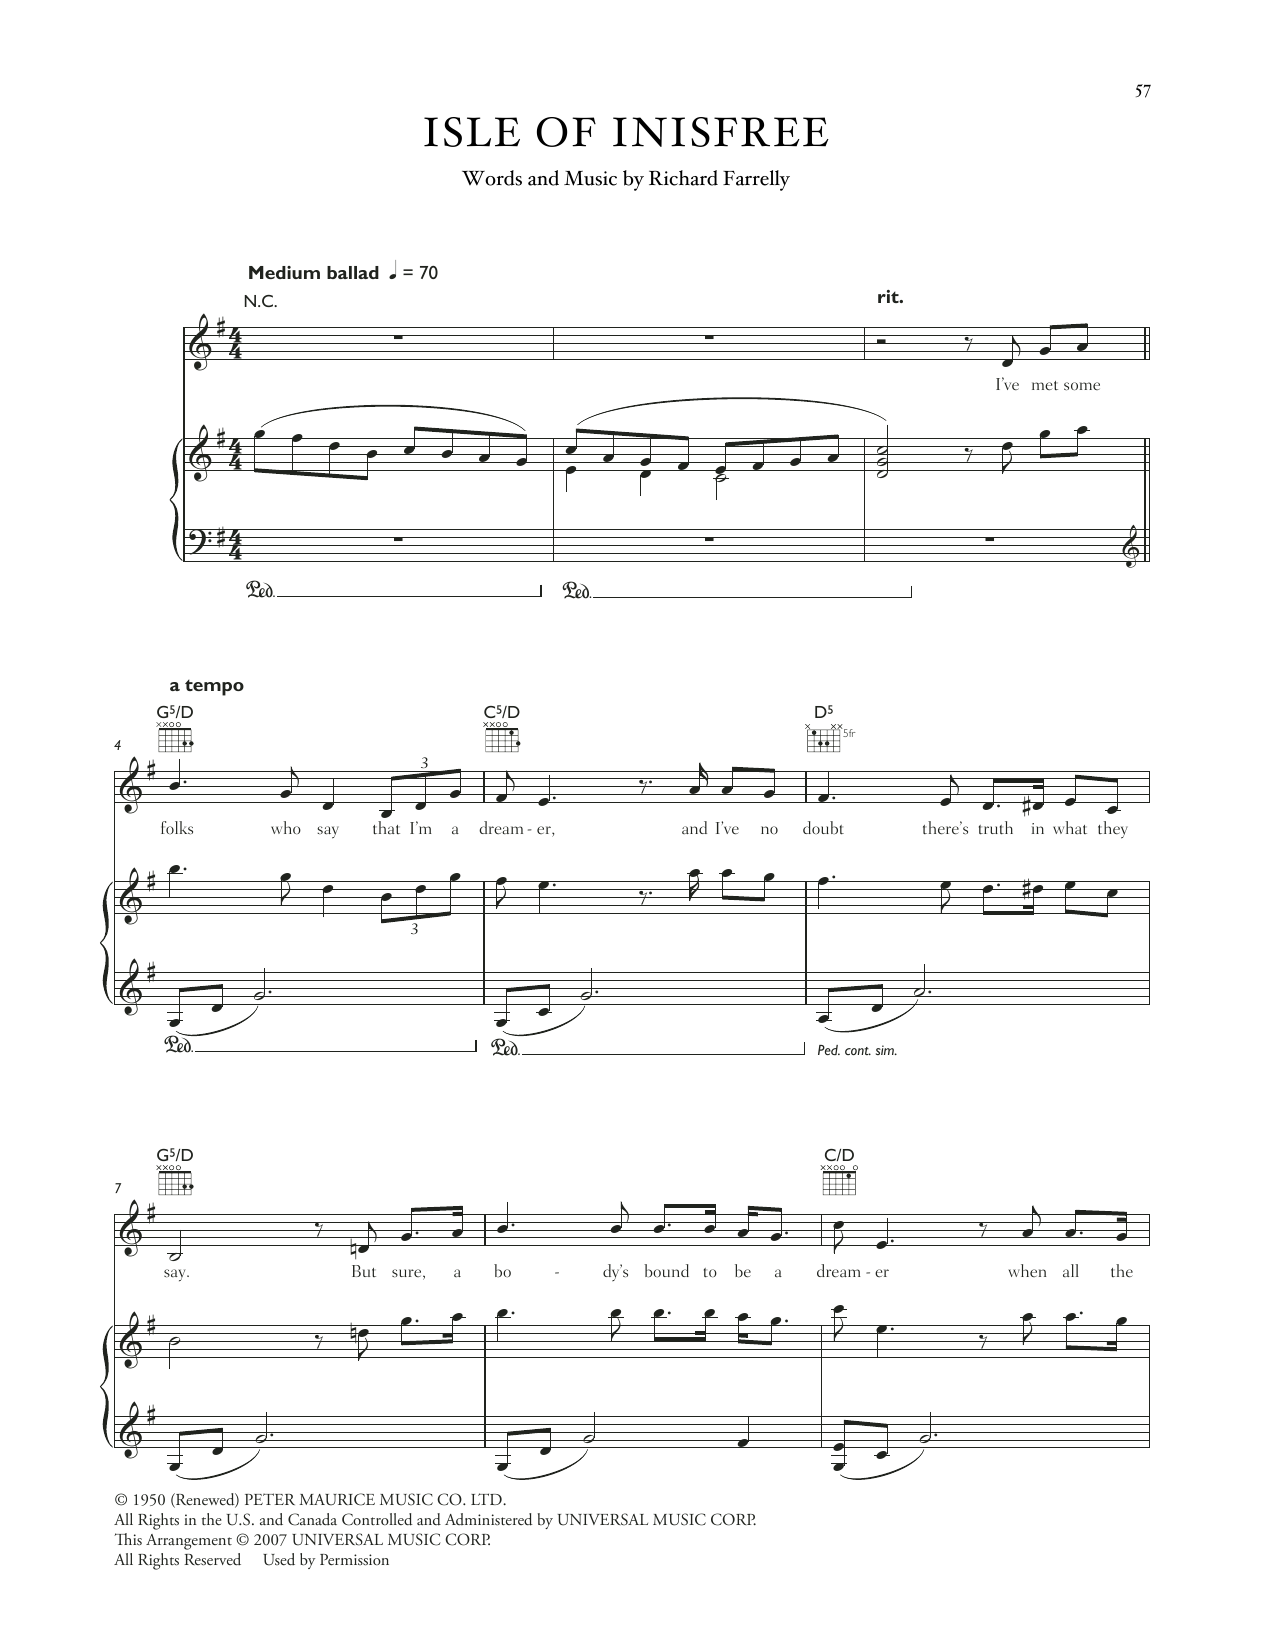 Download Celtic Woman The Isle Of Innisfree Sheet Music